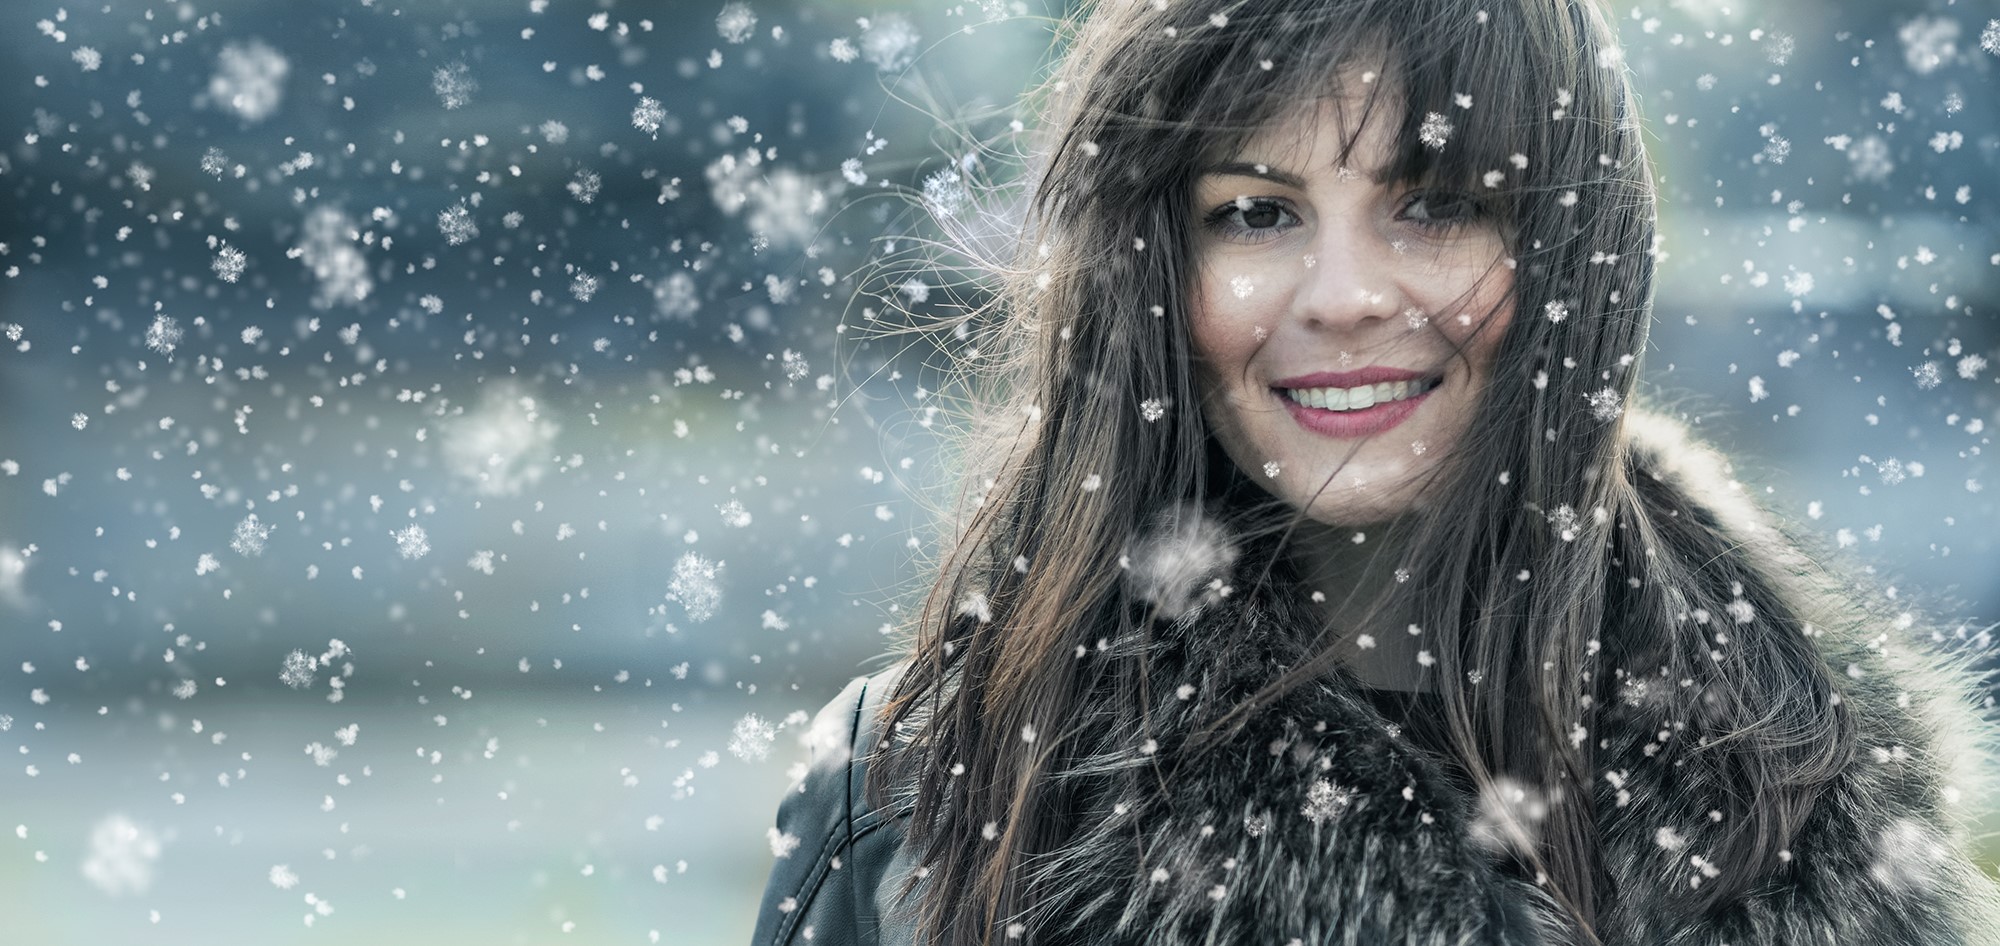 BE Careful With THE COLD! TIPS FOR YOUR WIG IN WINTER